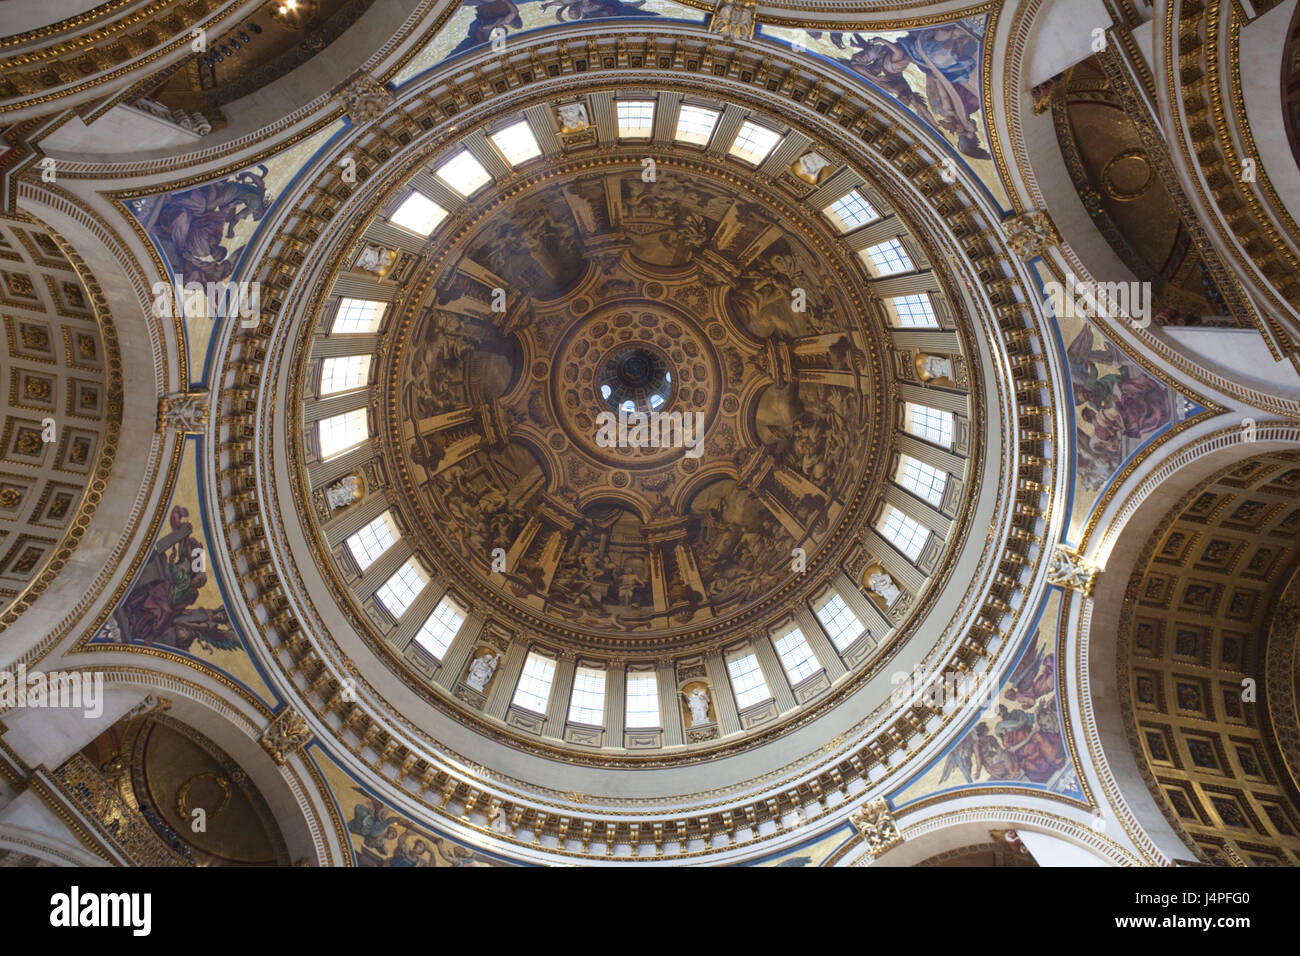 Great Britain England London St Paul S Cathedral Dome